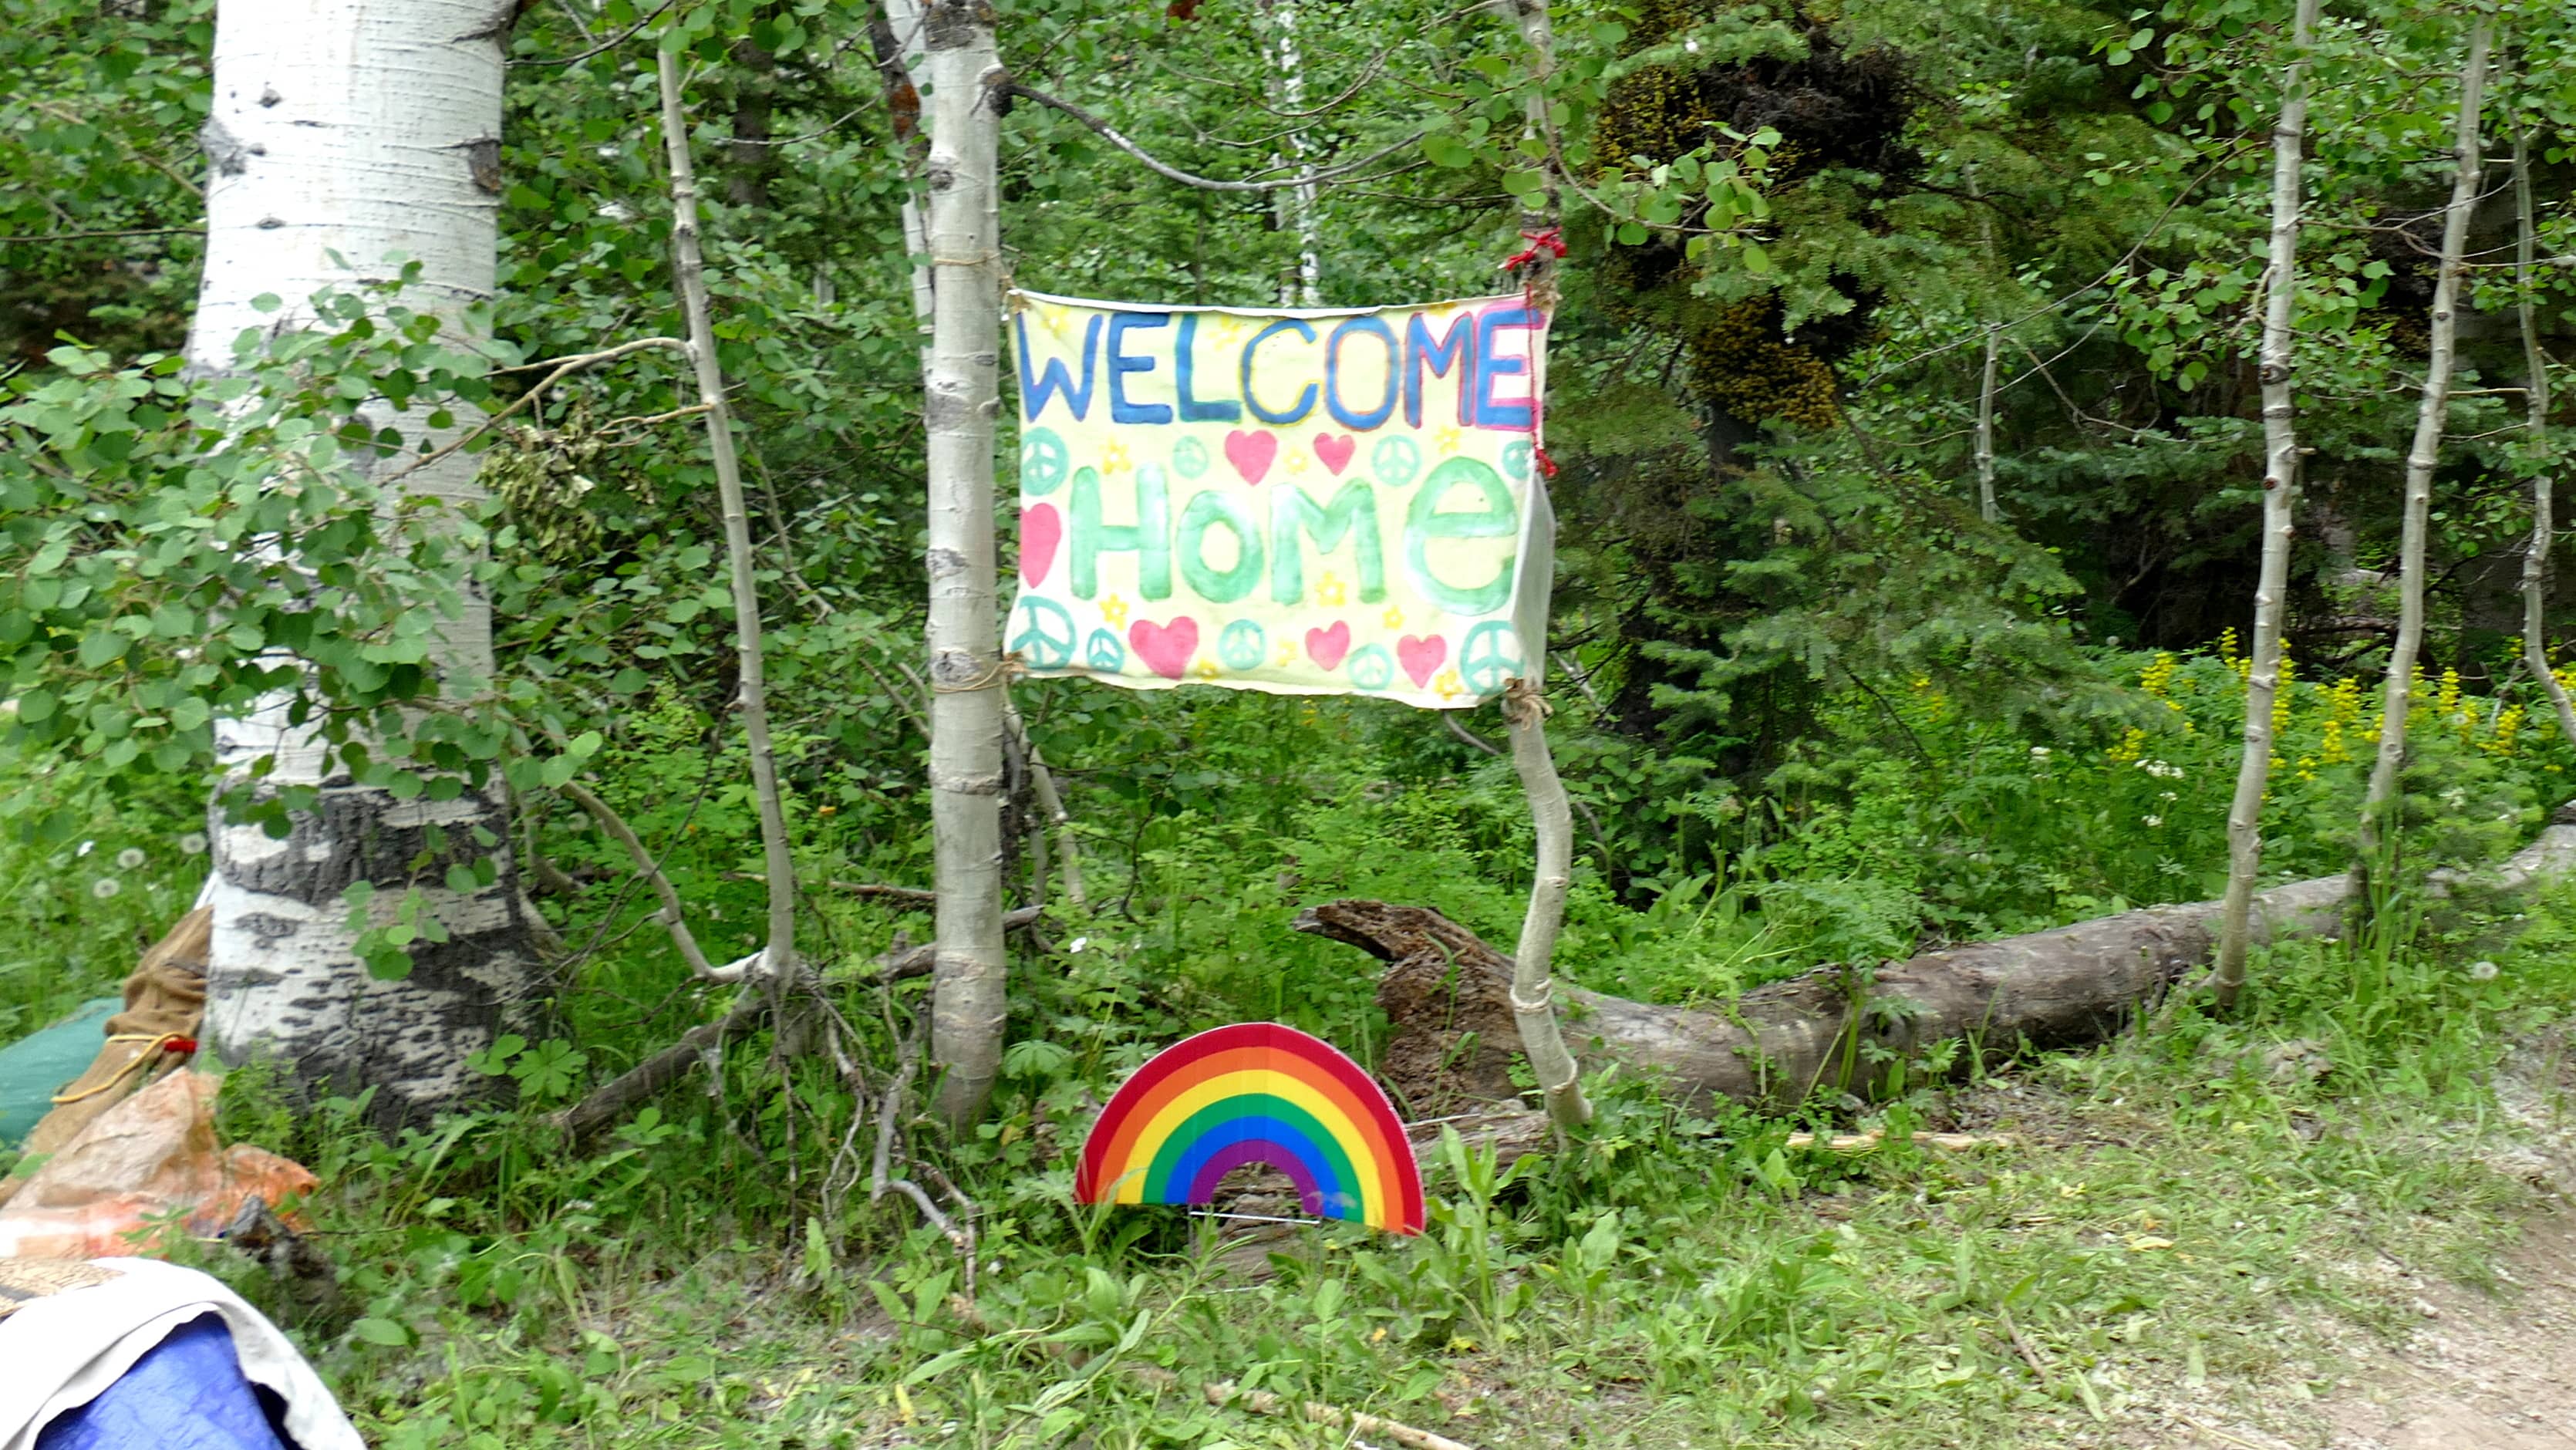 Arrests for alleged fentanyl possession made at Rainbow Gathering